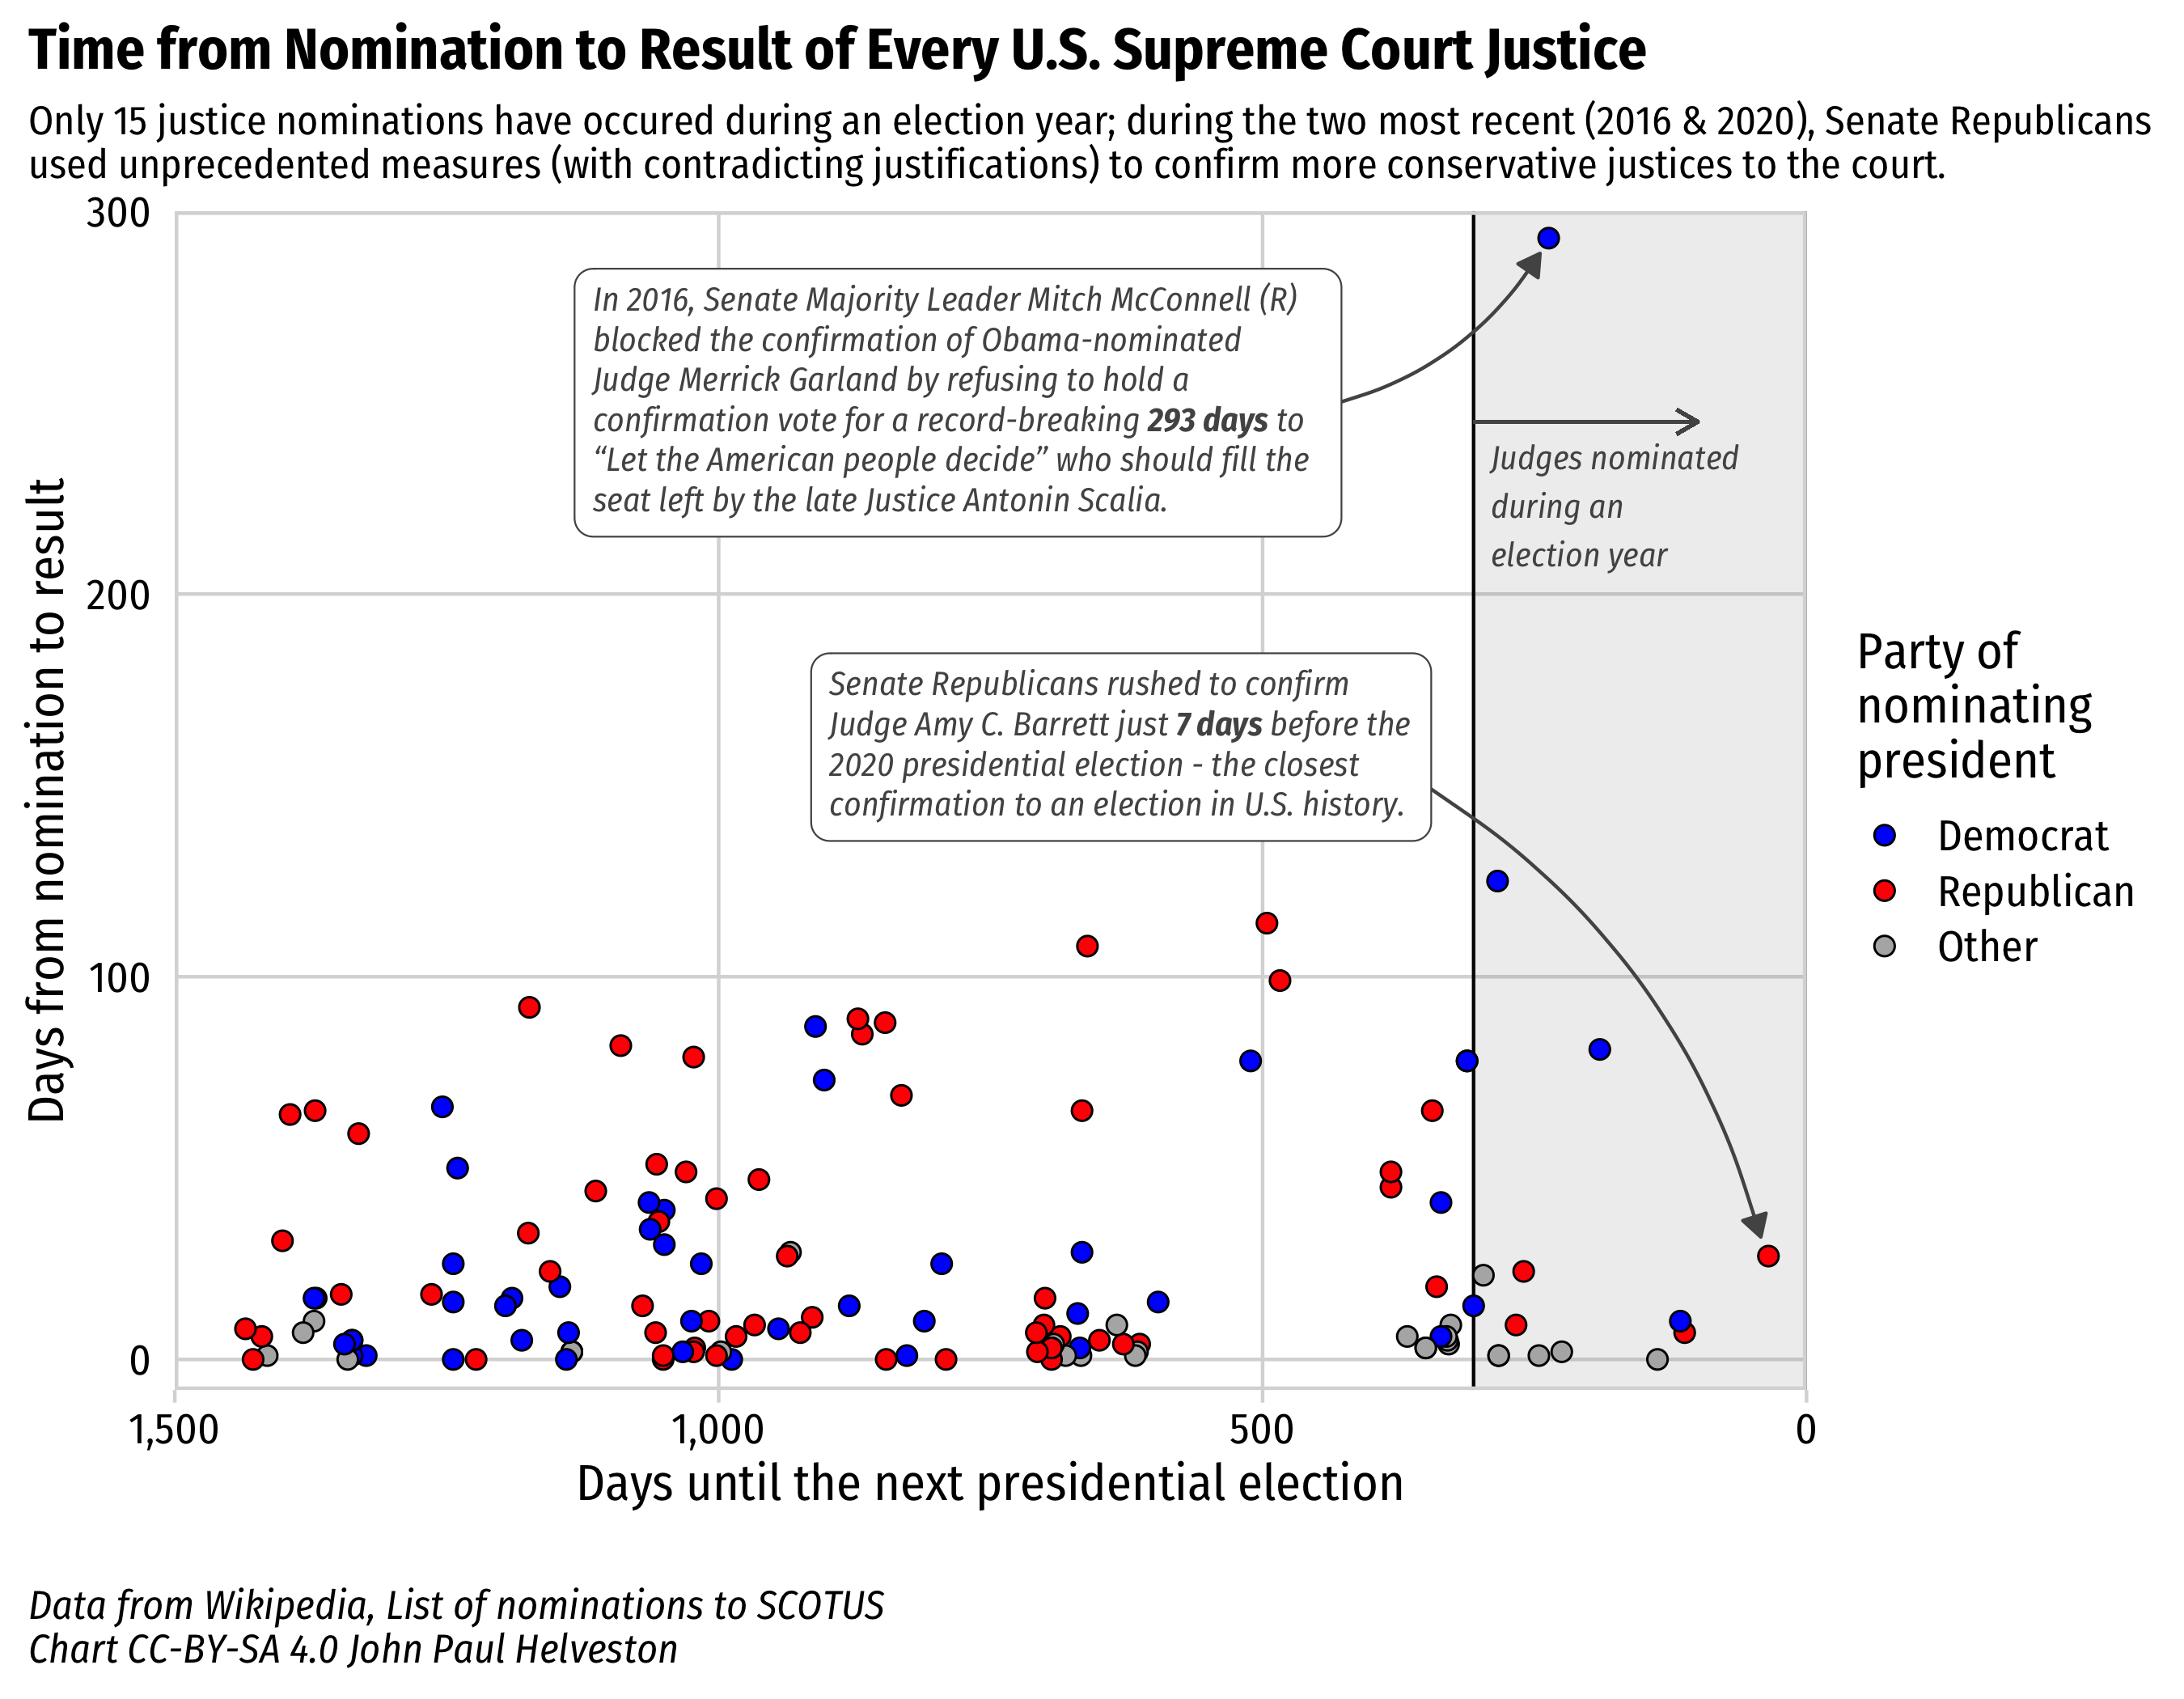 Time from Nomination to Result of Every US Supreme Court Justice.